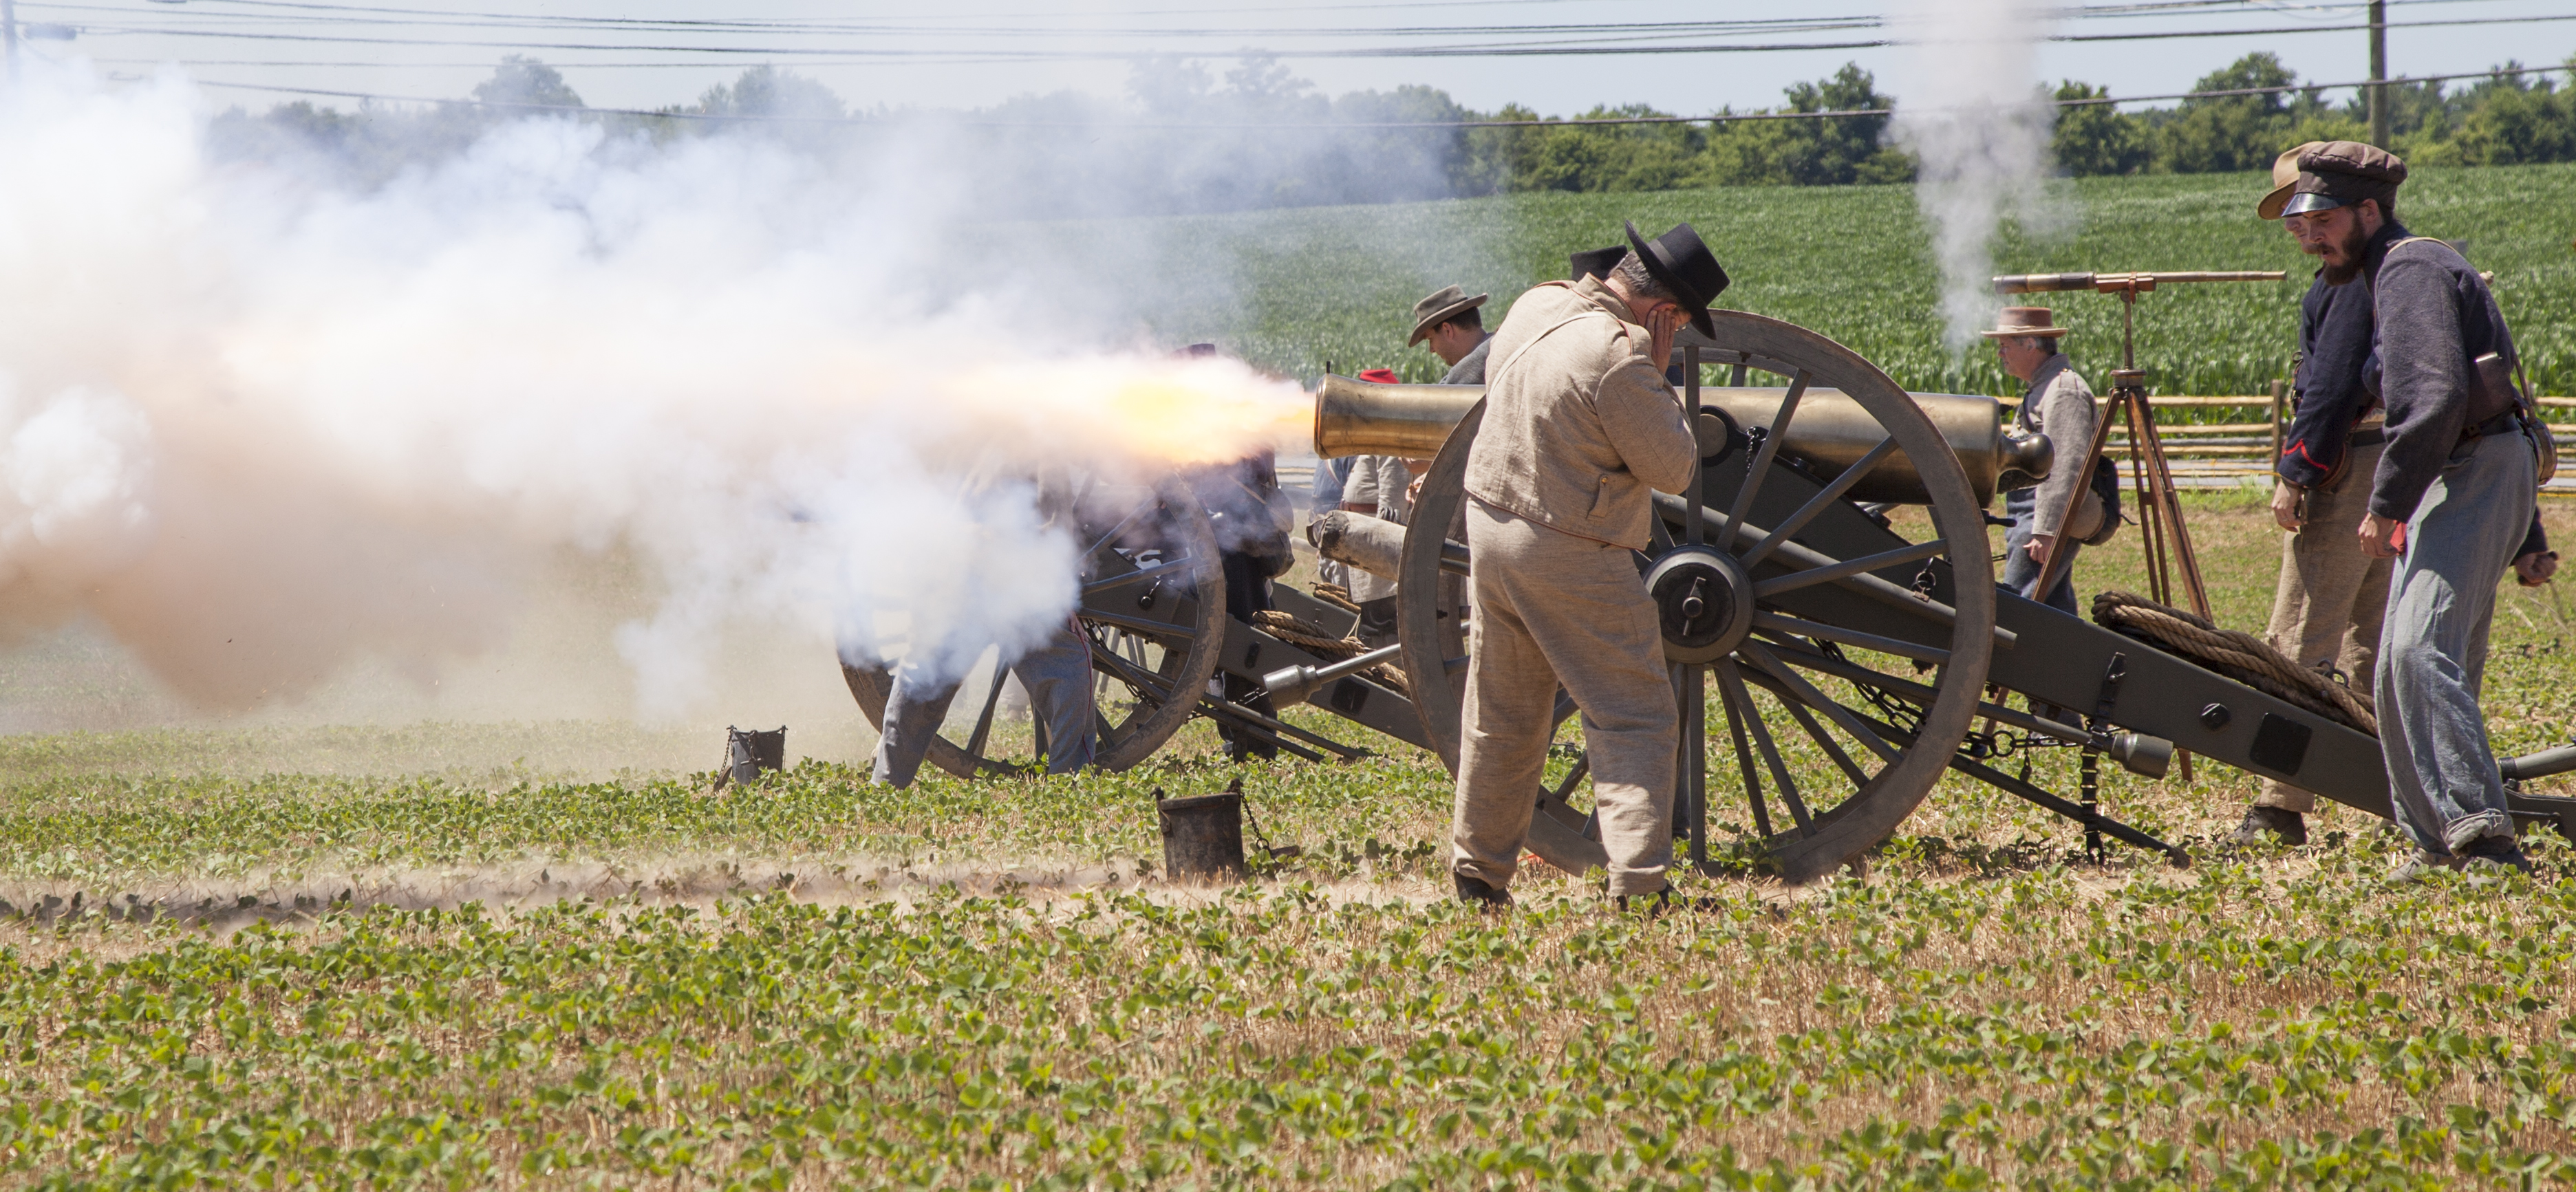 Smoke erupts from a cannon as volunteers dressed in Federal and Confederate Civil War uniforms turn away.